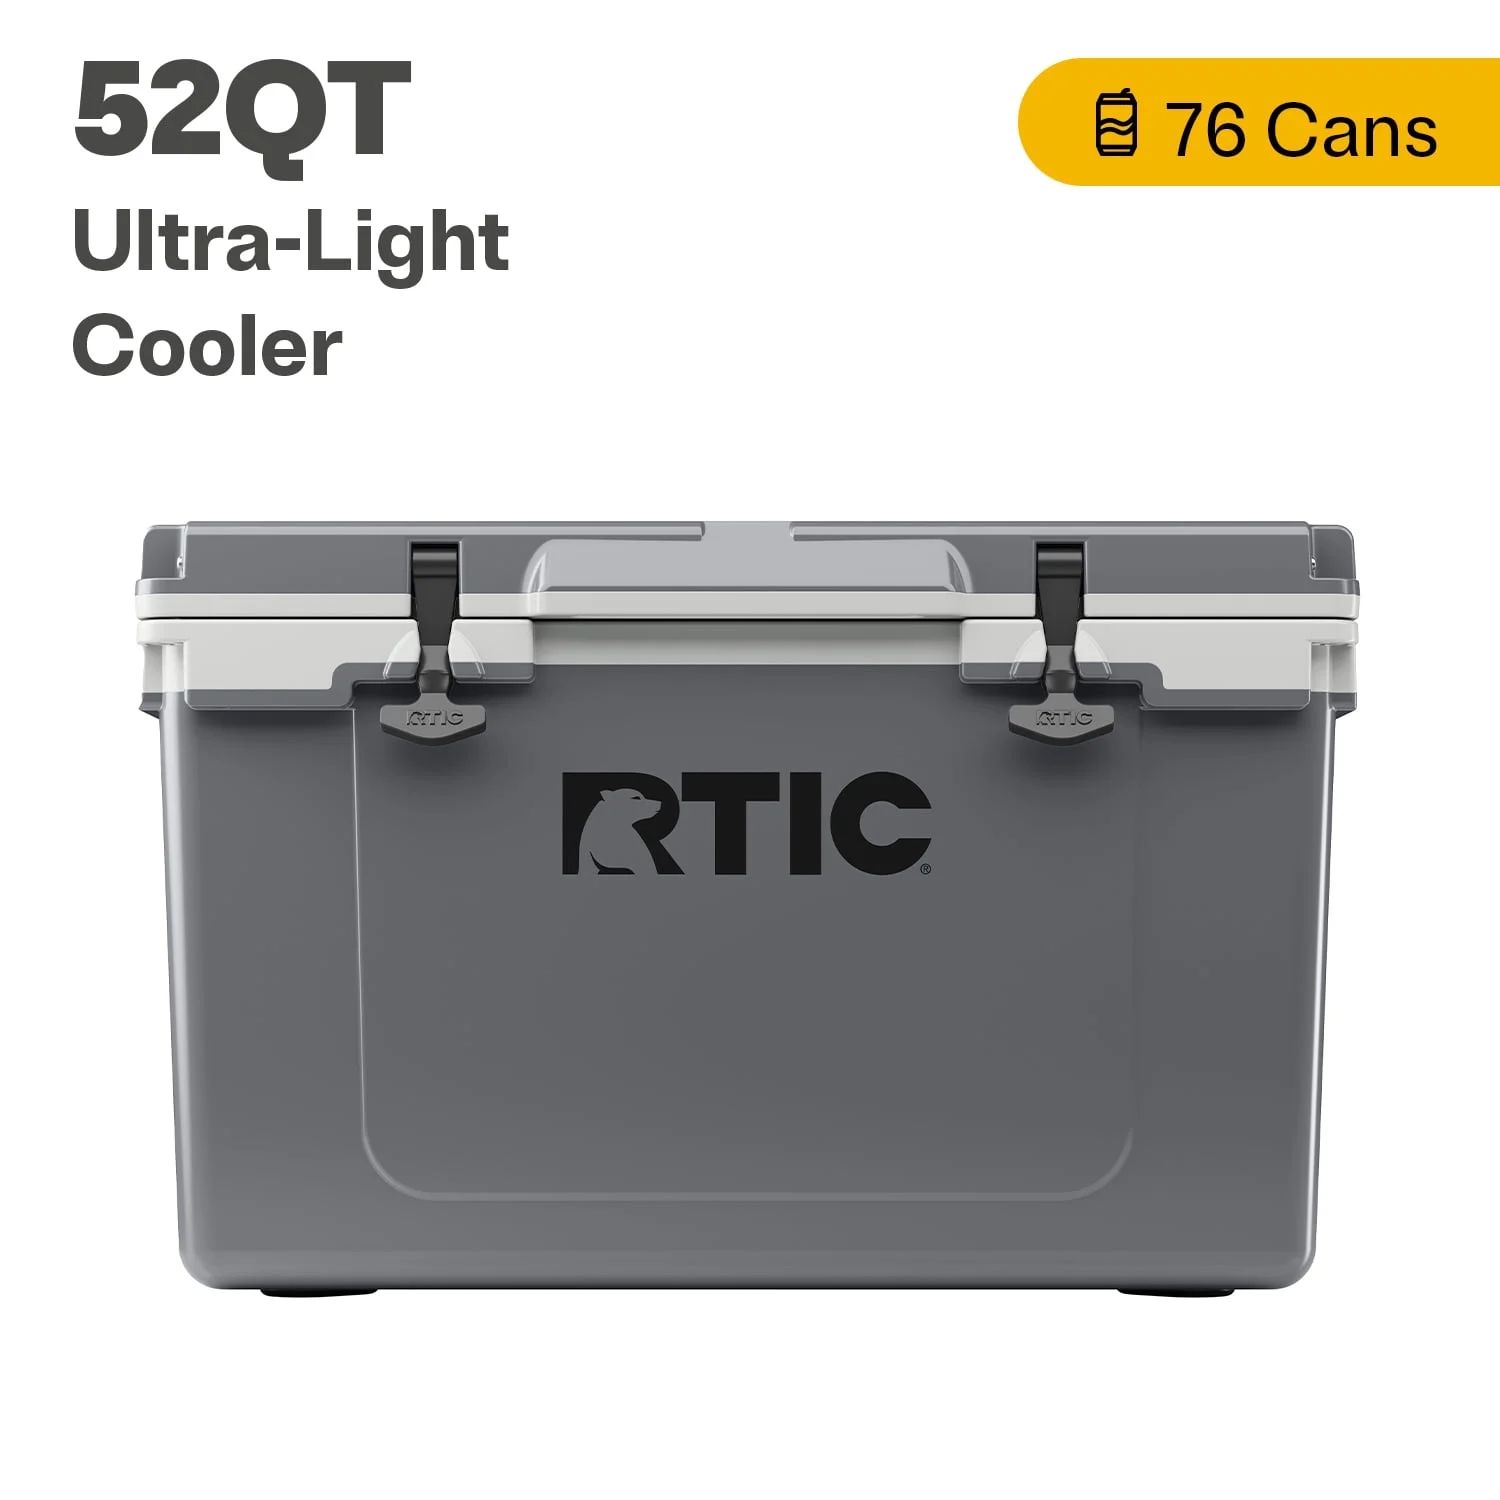 RTIC 52 QT Ultra-Light Hard-Sided Ice Chest Cooler, Dark Grey And Cool Grey, Fits 76 Cans | Walmart (US)